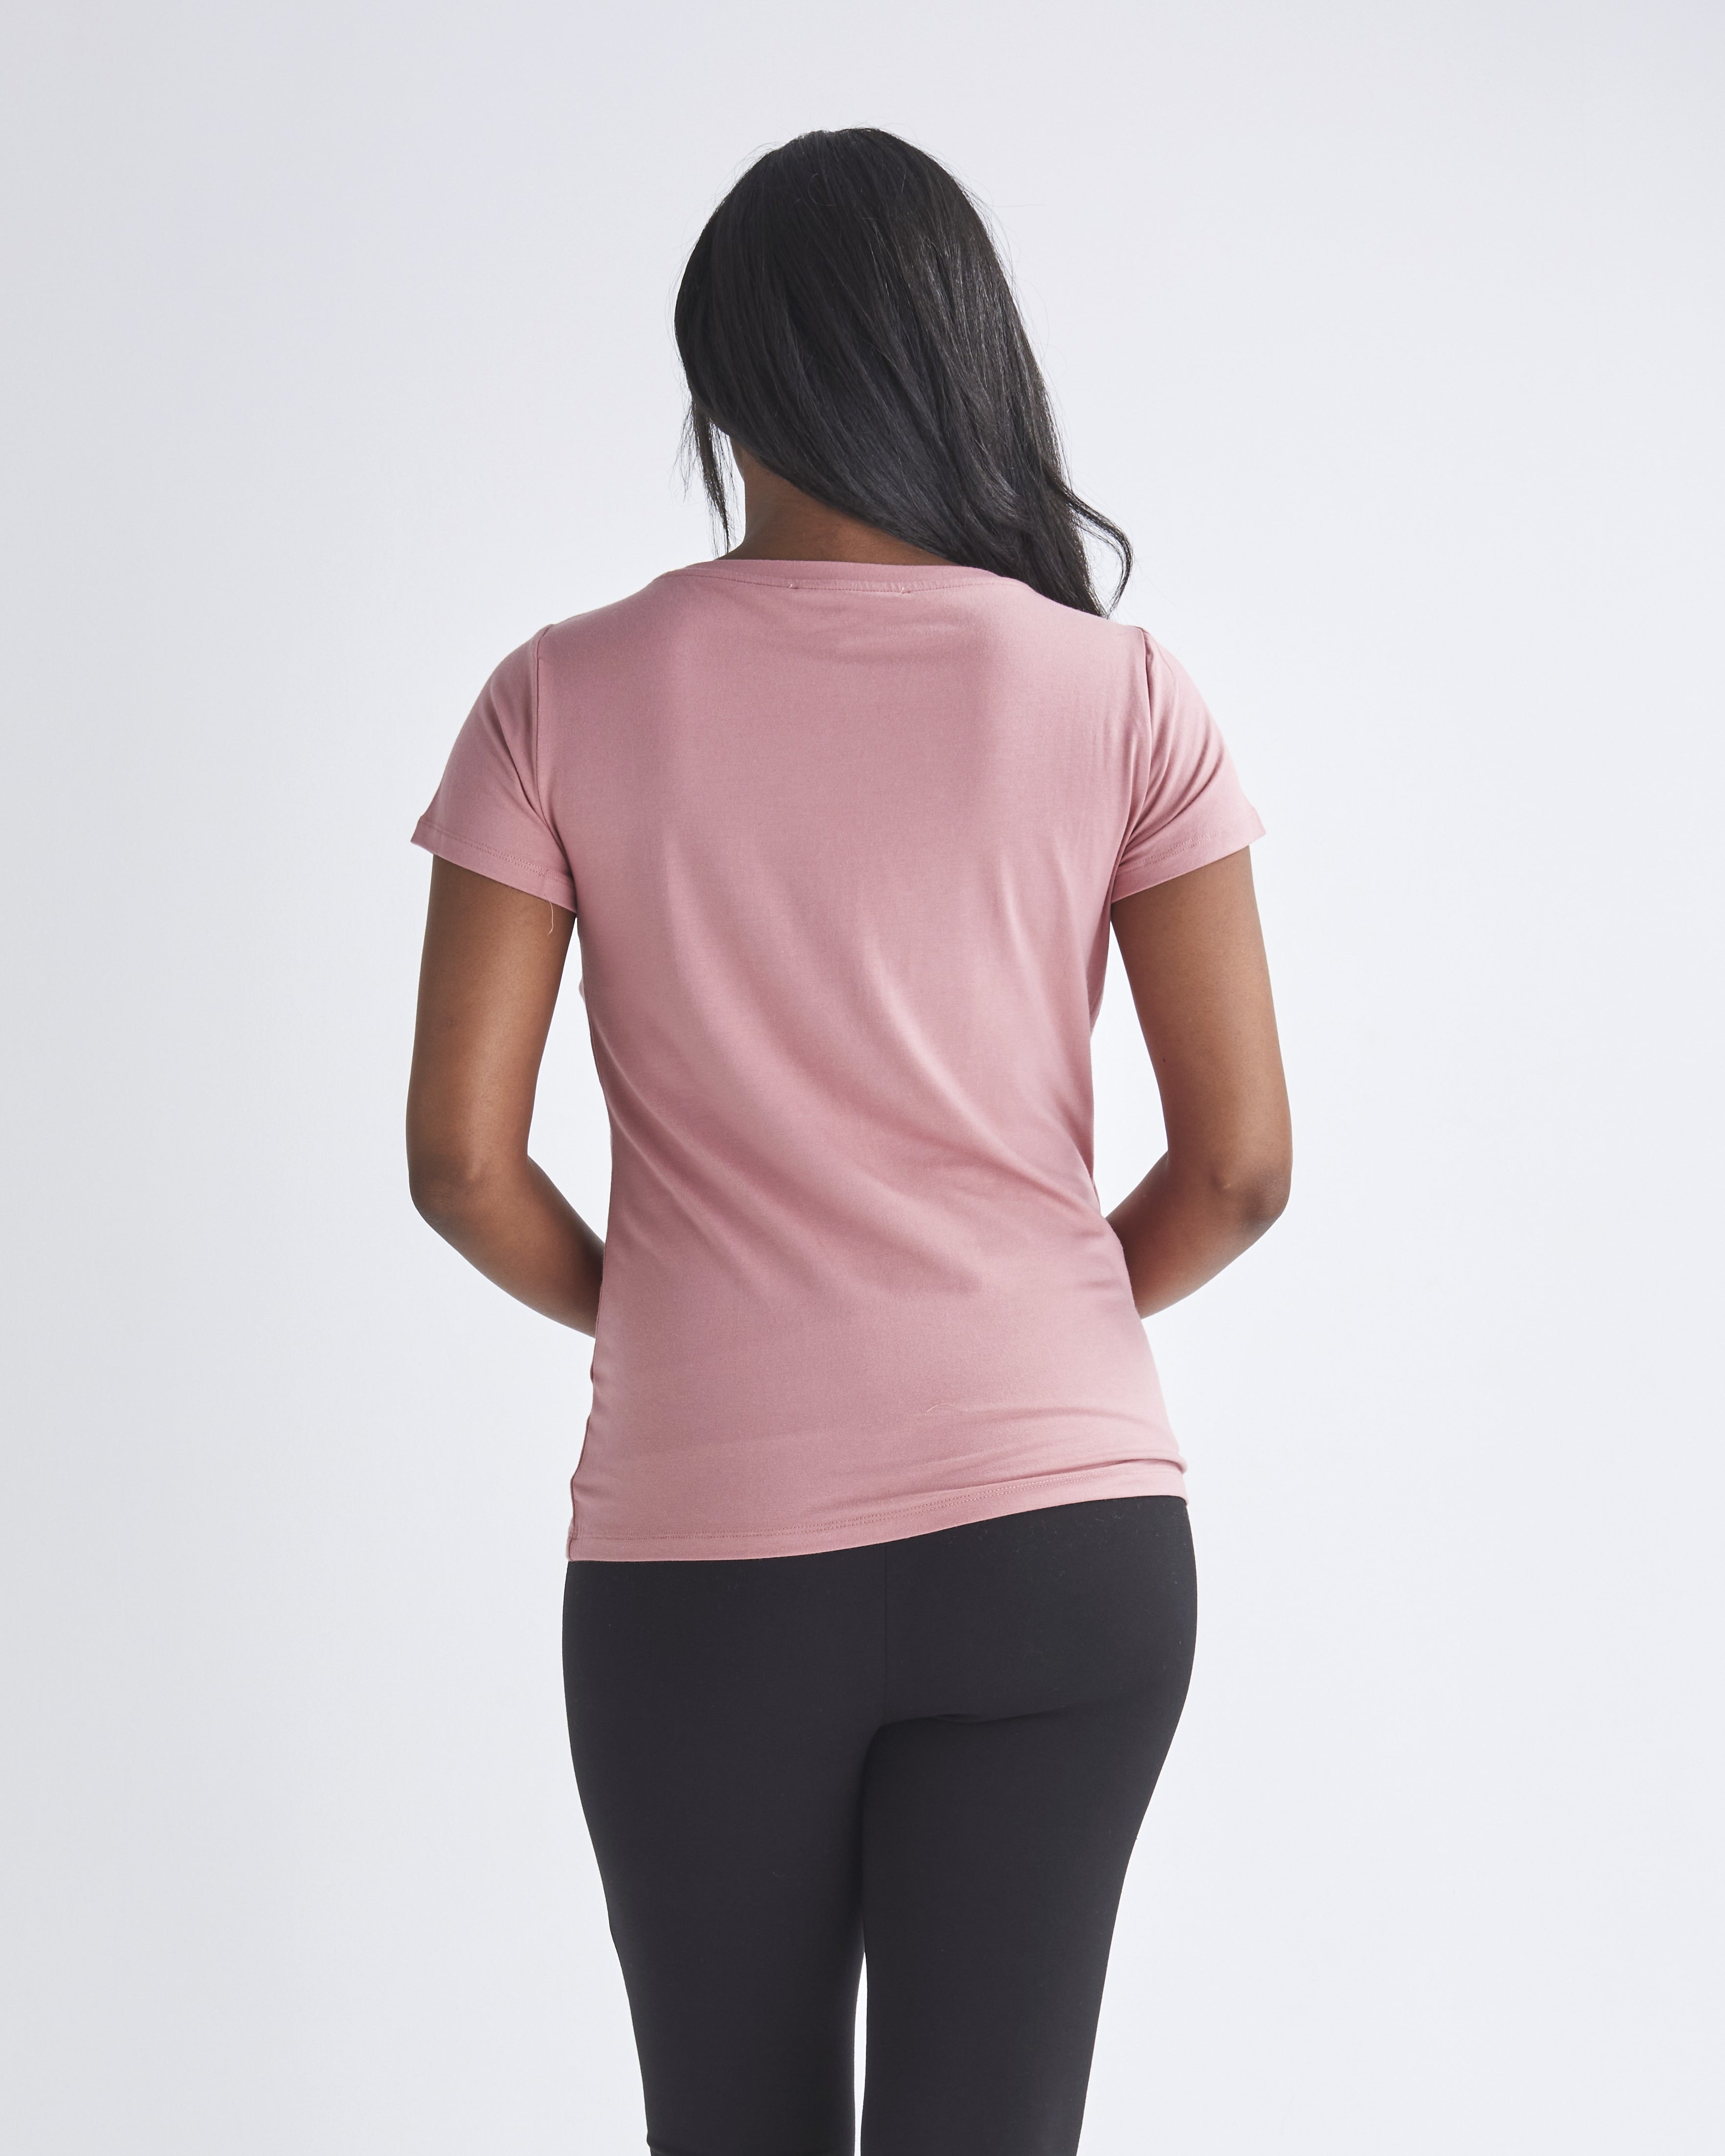 Back view - A woman wearing easy access to breastfeeding nursing top with petal front design from Angel Maternity